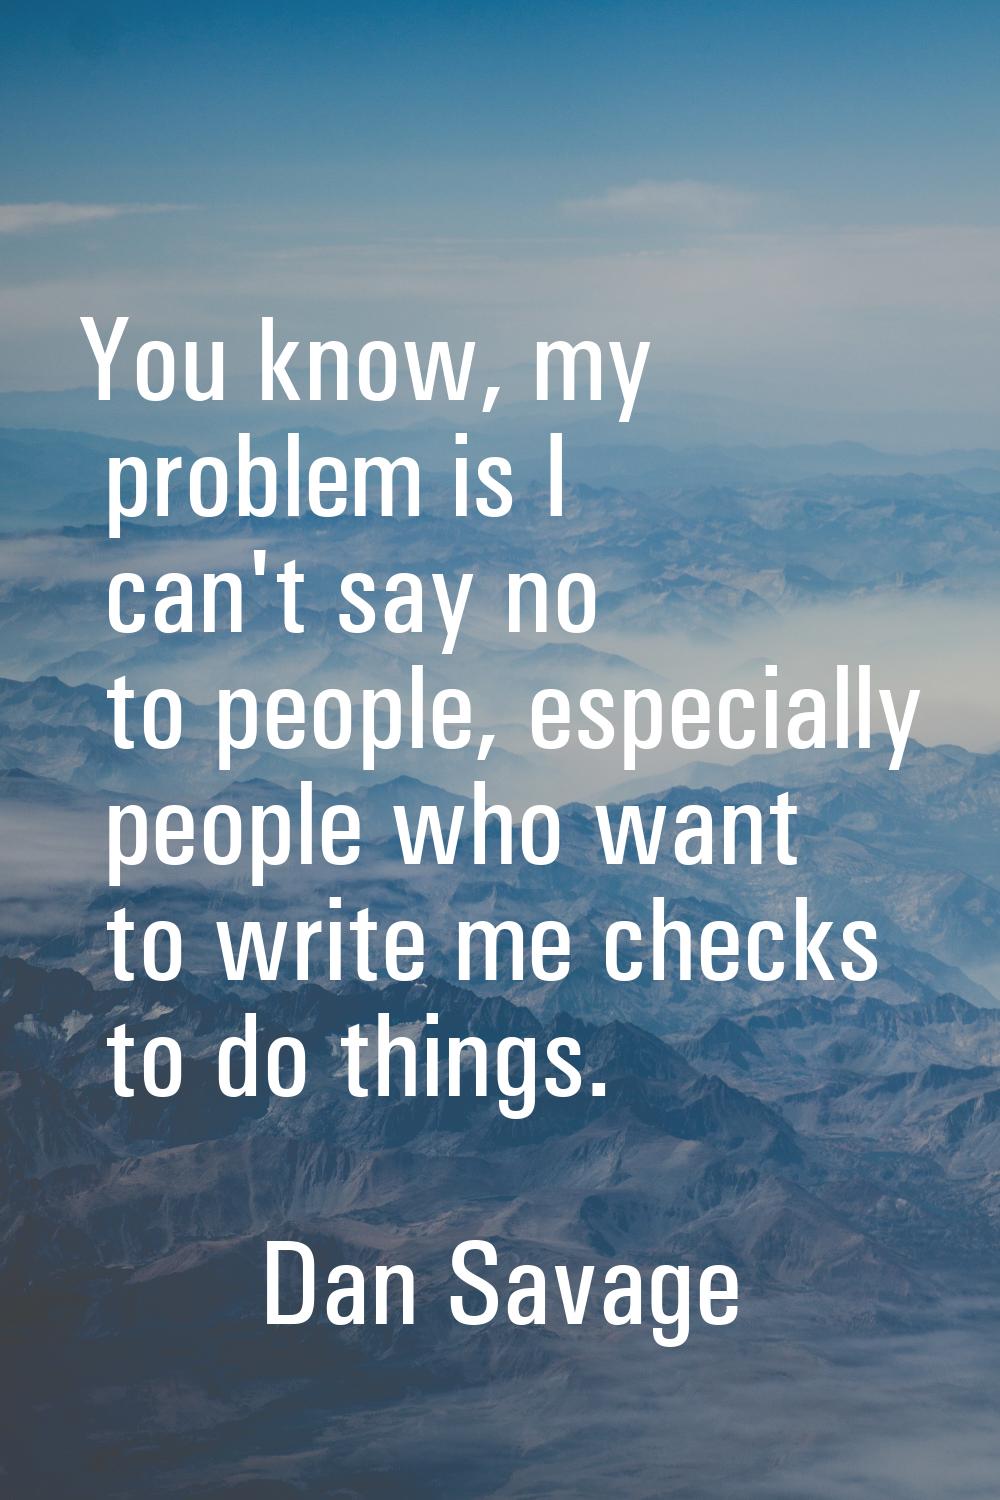 You know, my problem is I can't say no to people, especially people who want to write me checks to 